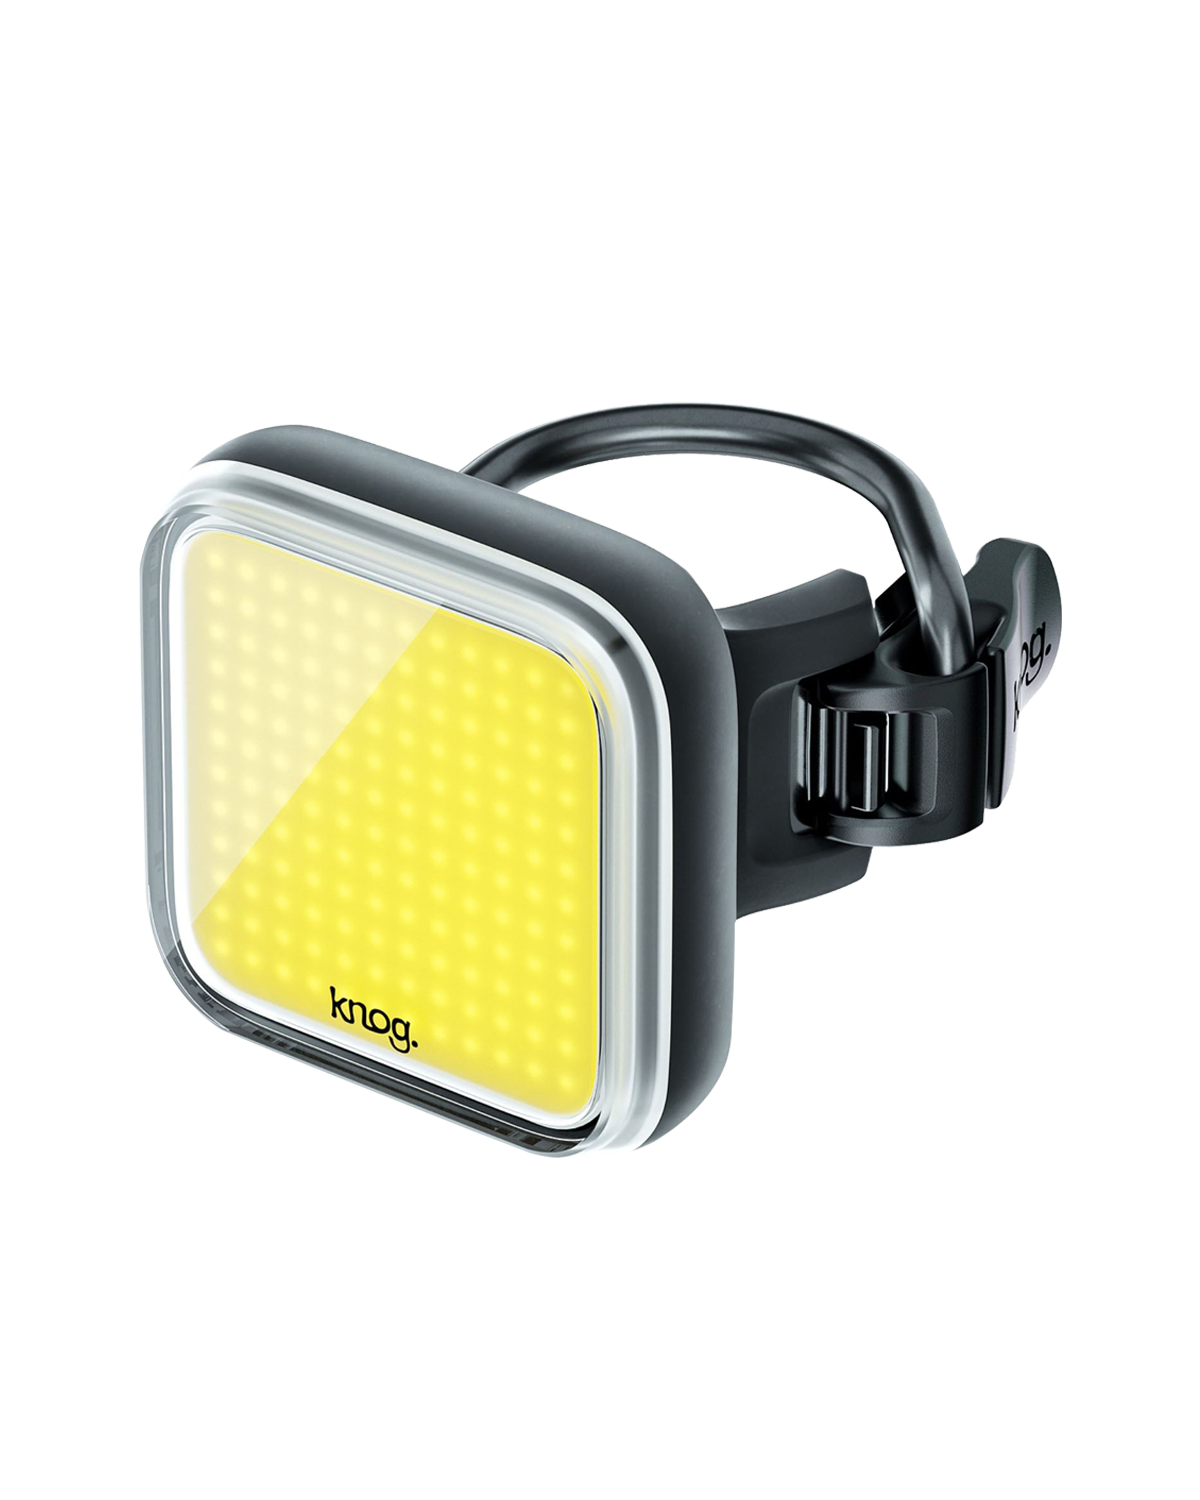 Knog Blinder Front X Bicycle Light USB Rechargeable